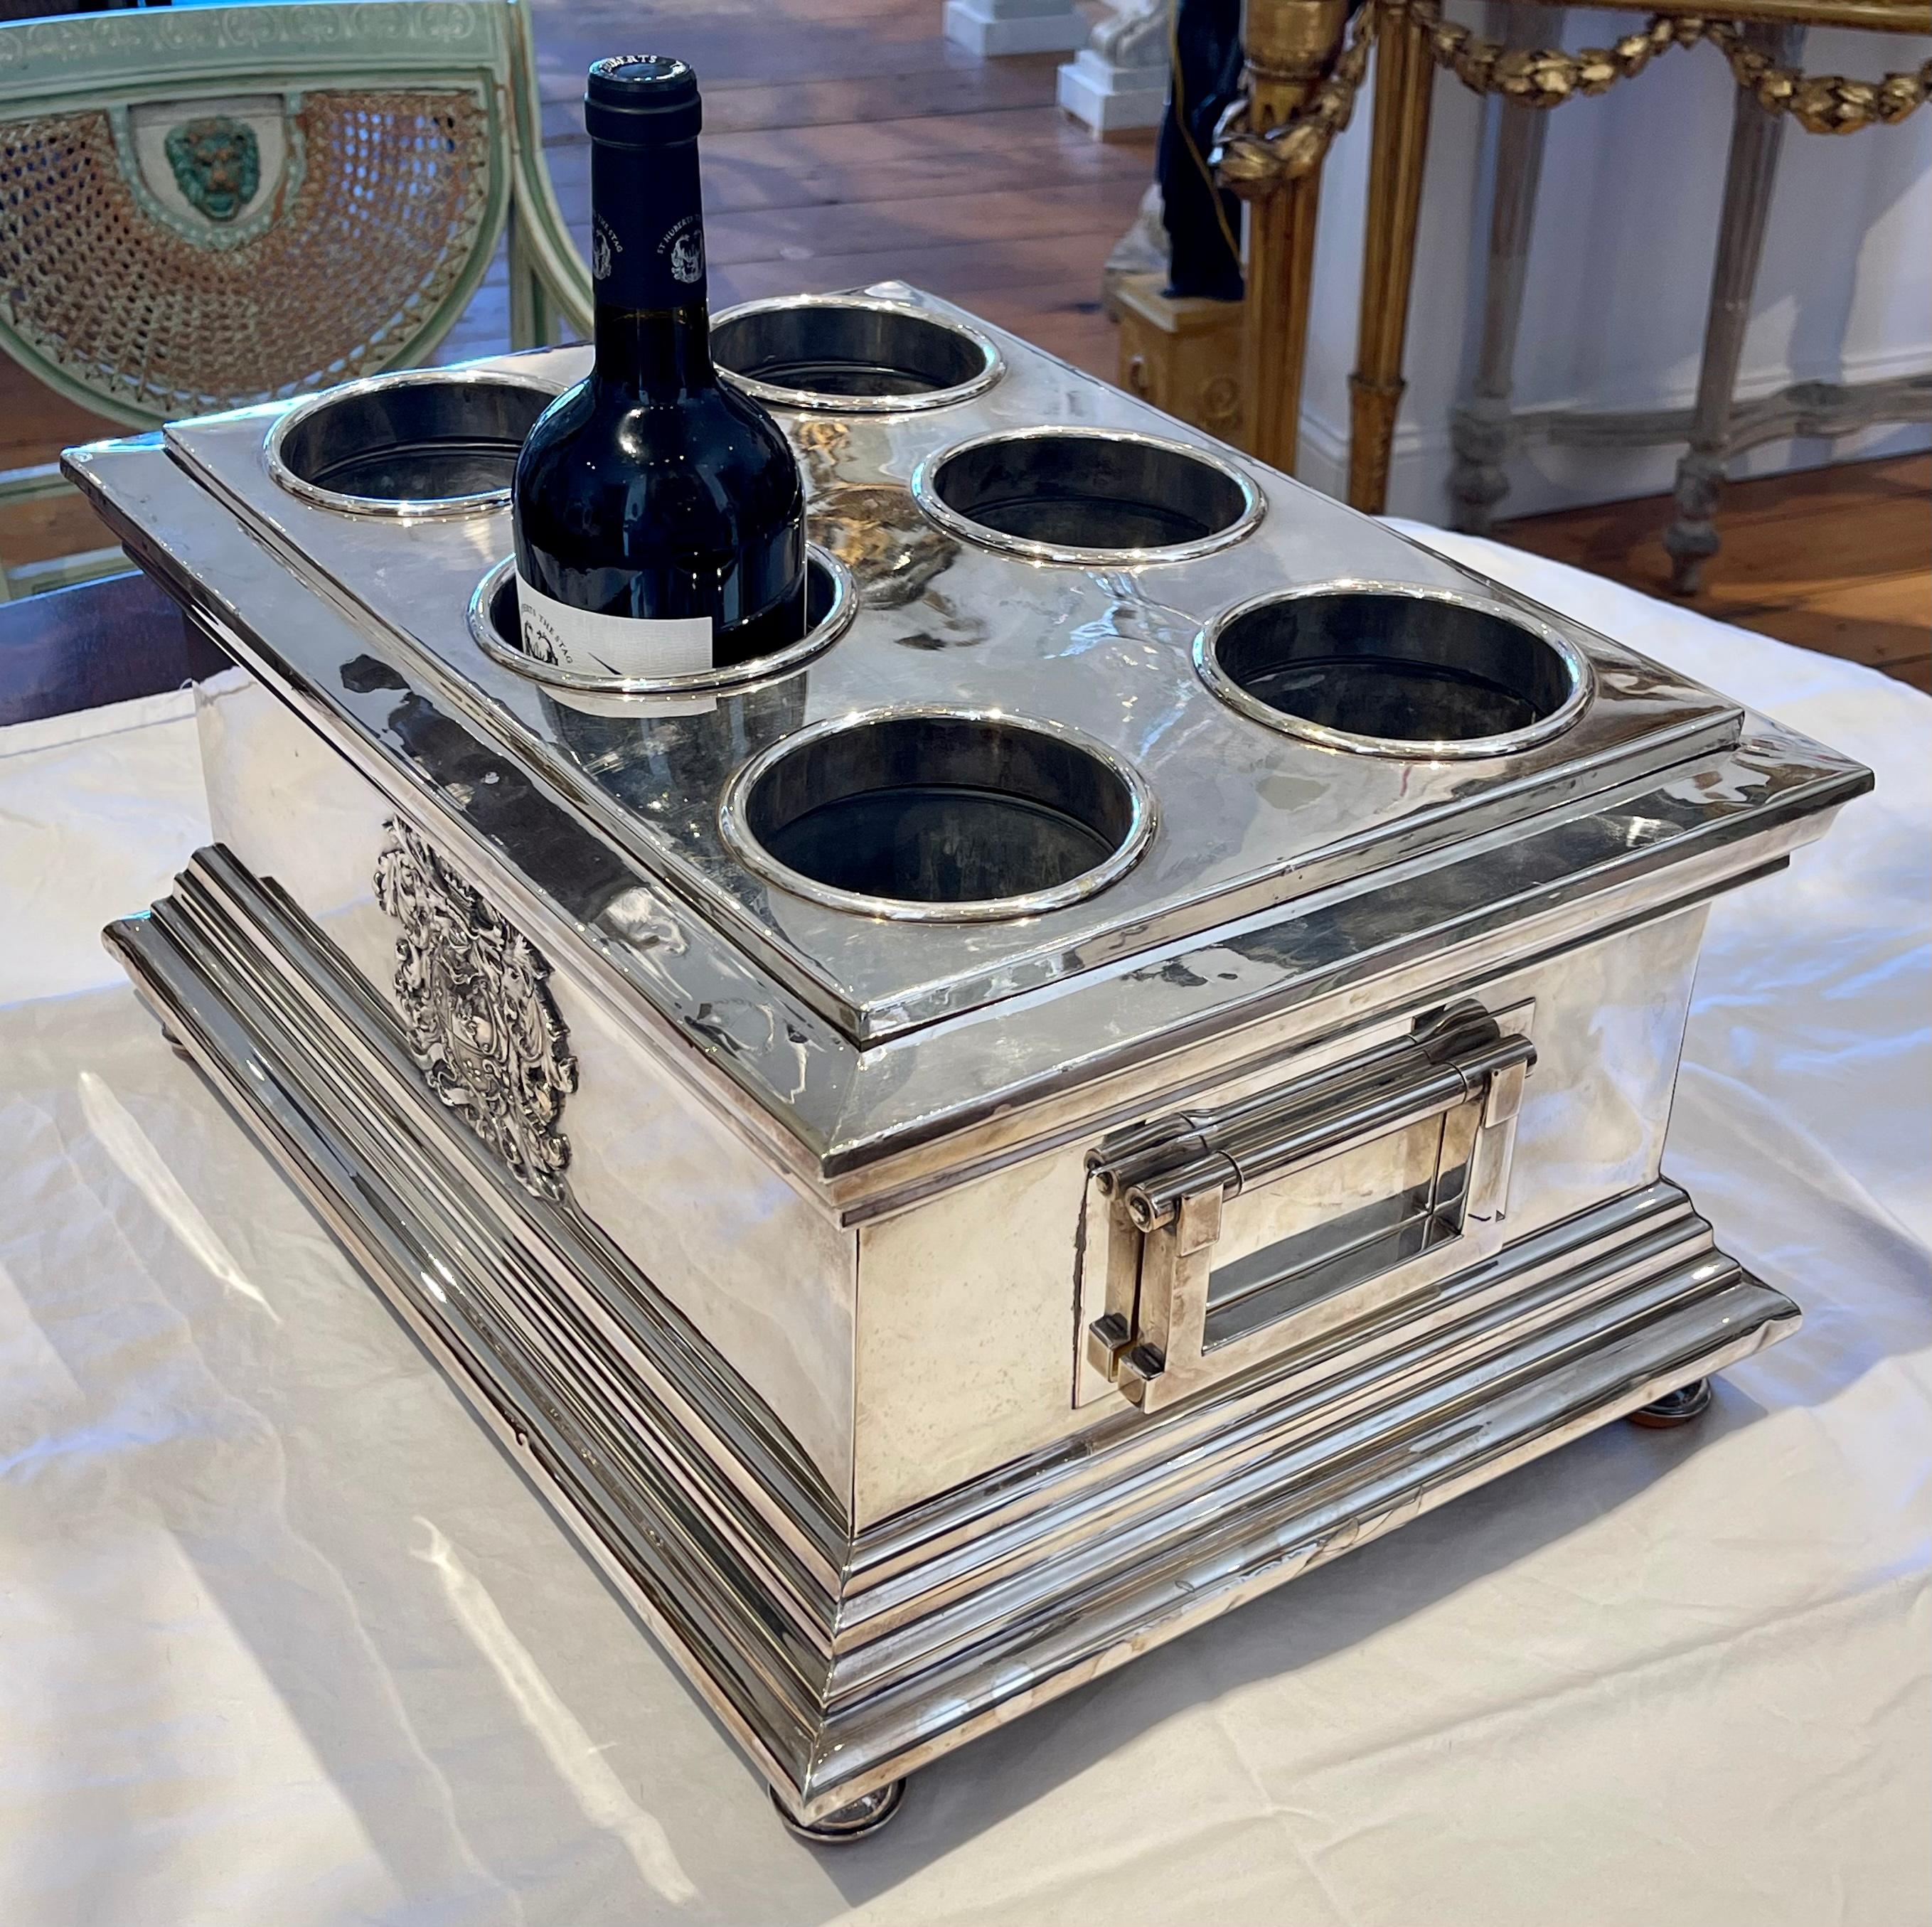 Rare Sheffield Silver Plate Six Bottle Wine Cooler.  Armorial on both sides.  Ball Feet.  Handles.  Top lifts of to hold ice for chilling of wines.

Provenance:  Palm Beach Collection.  Fresh to Market